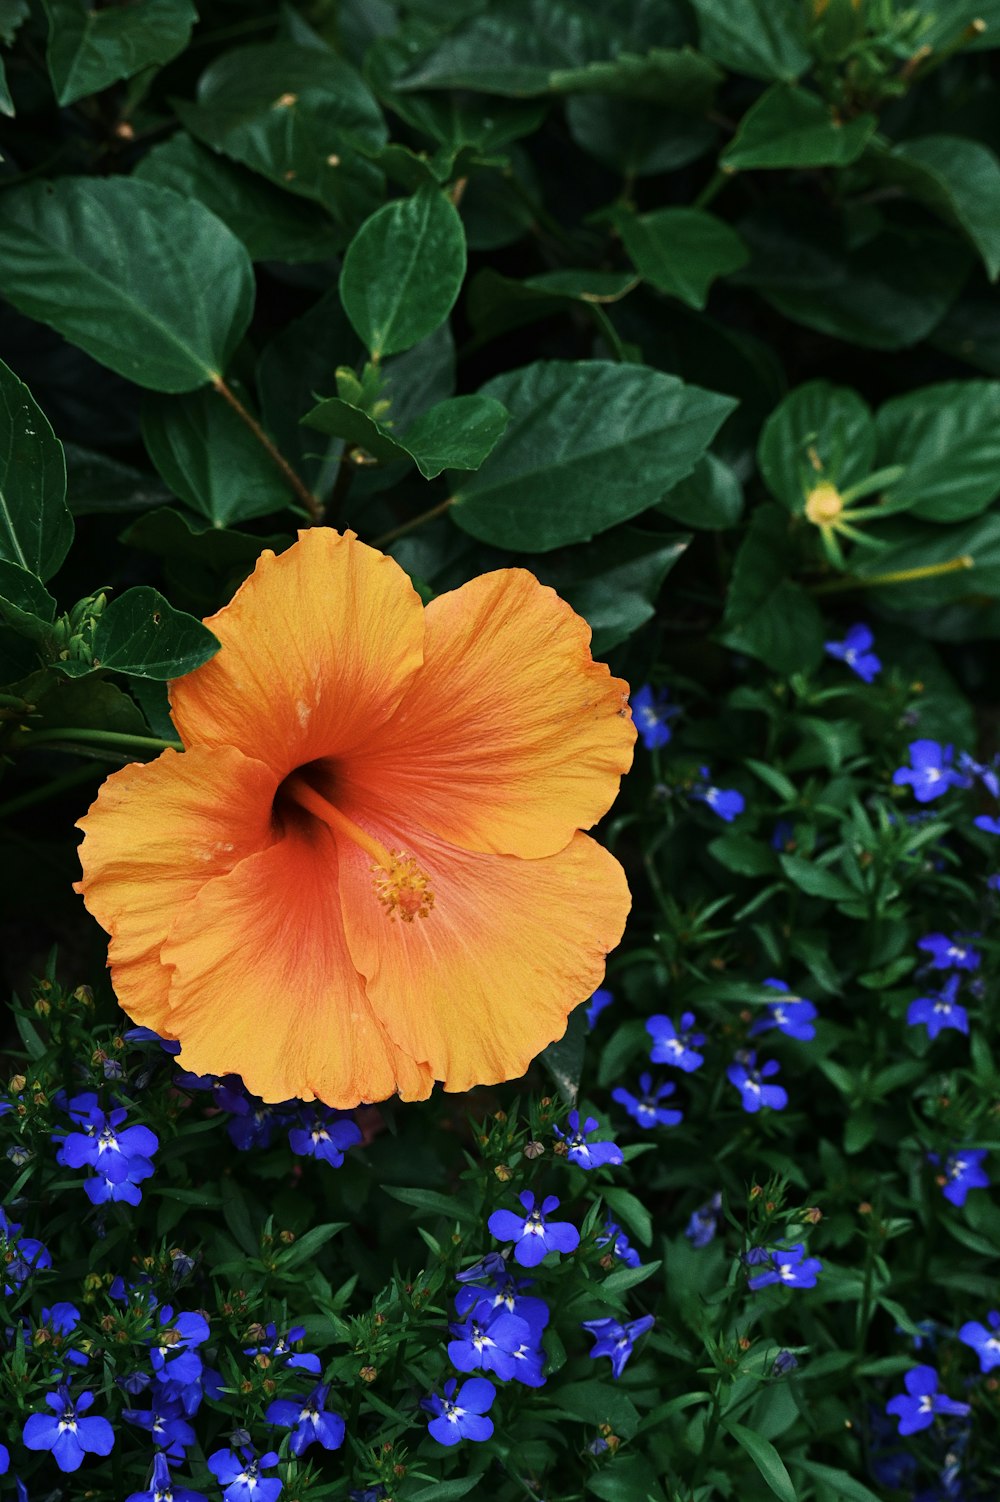 a large orange flower surrounded by blue flowers